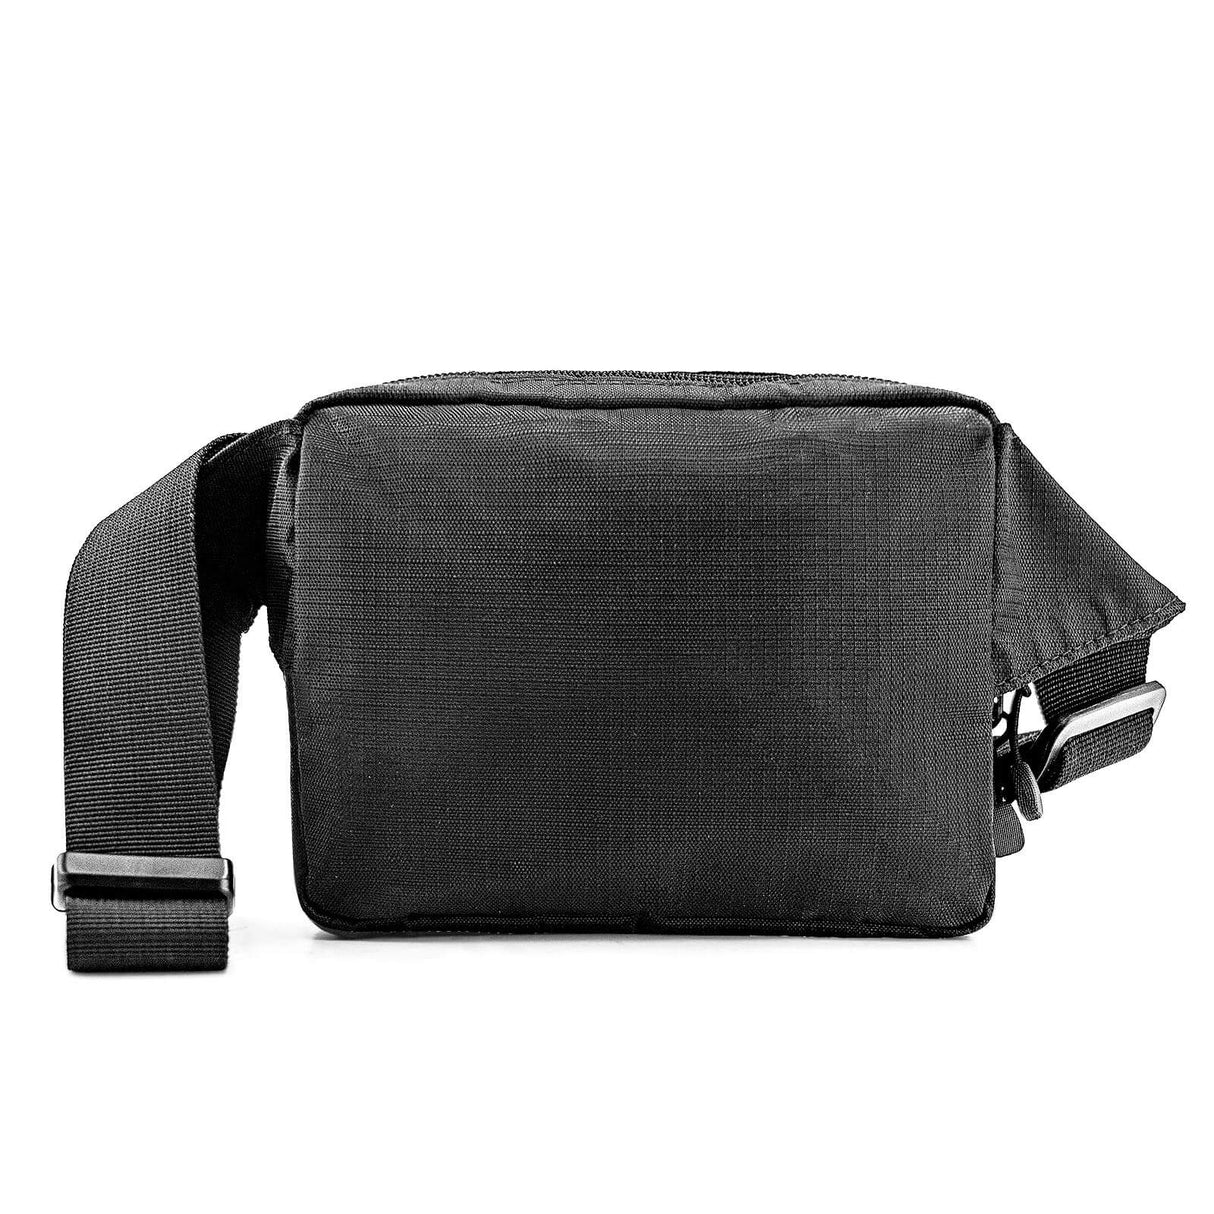 HUMANSUCKS Fanny Pack in black, front view on a seamless white background, adjustable strap